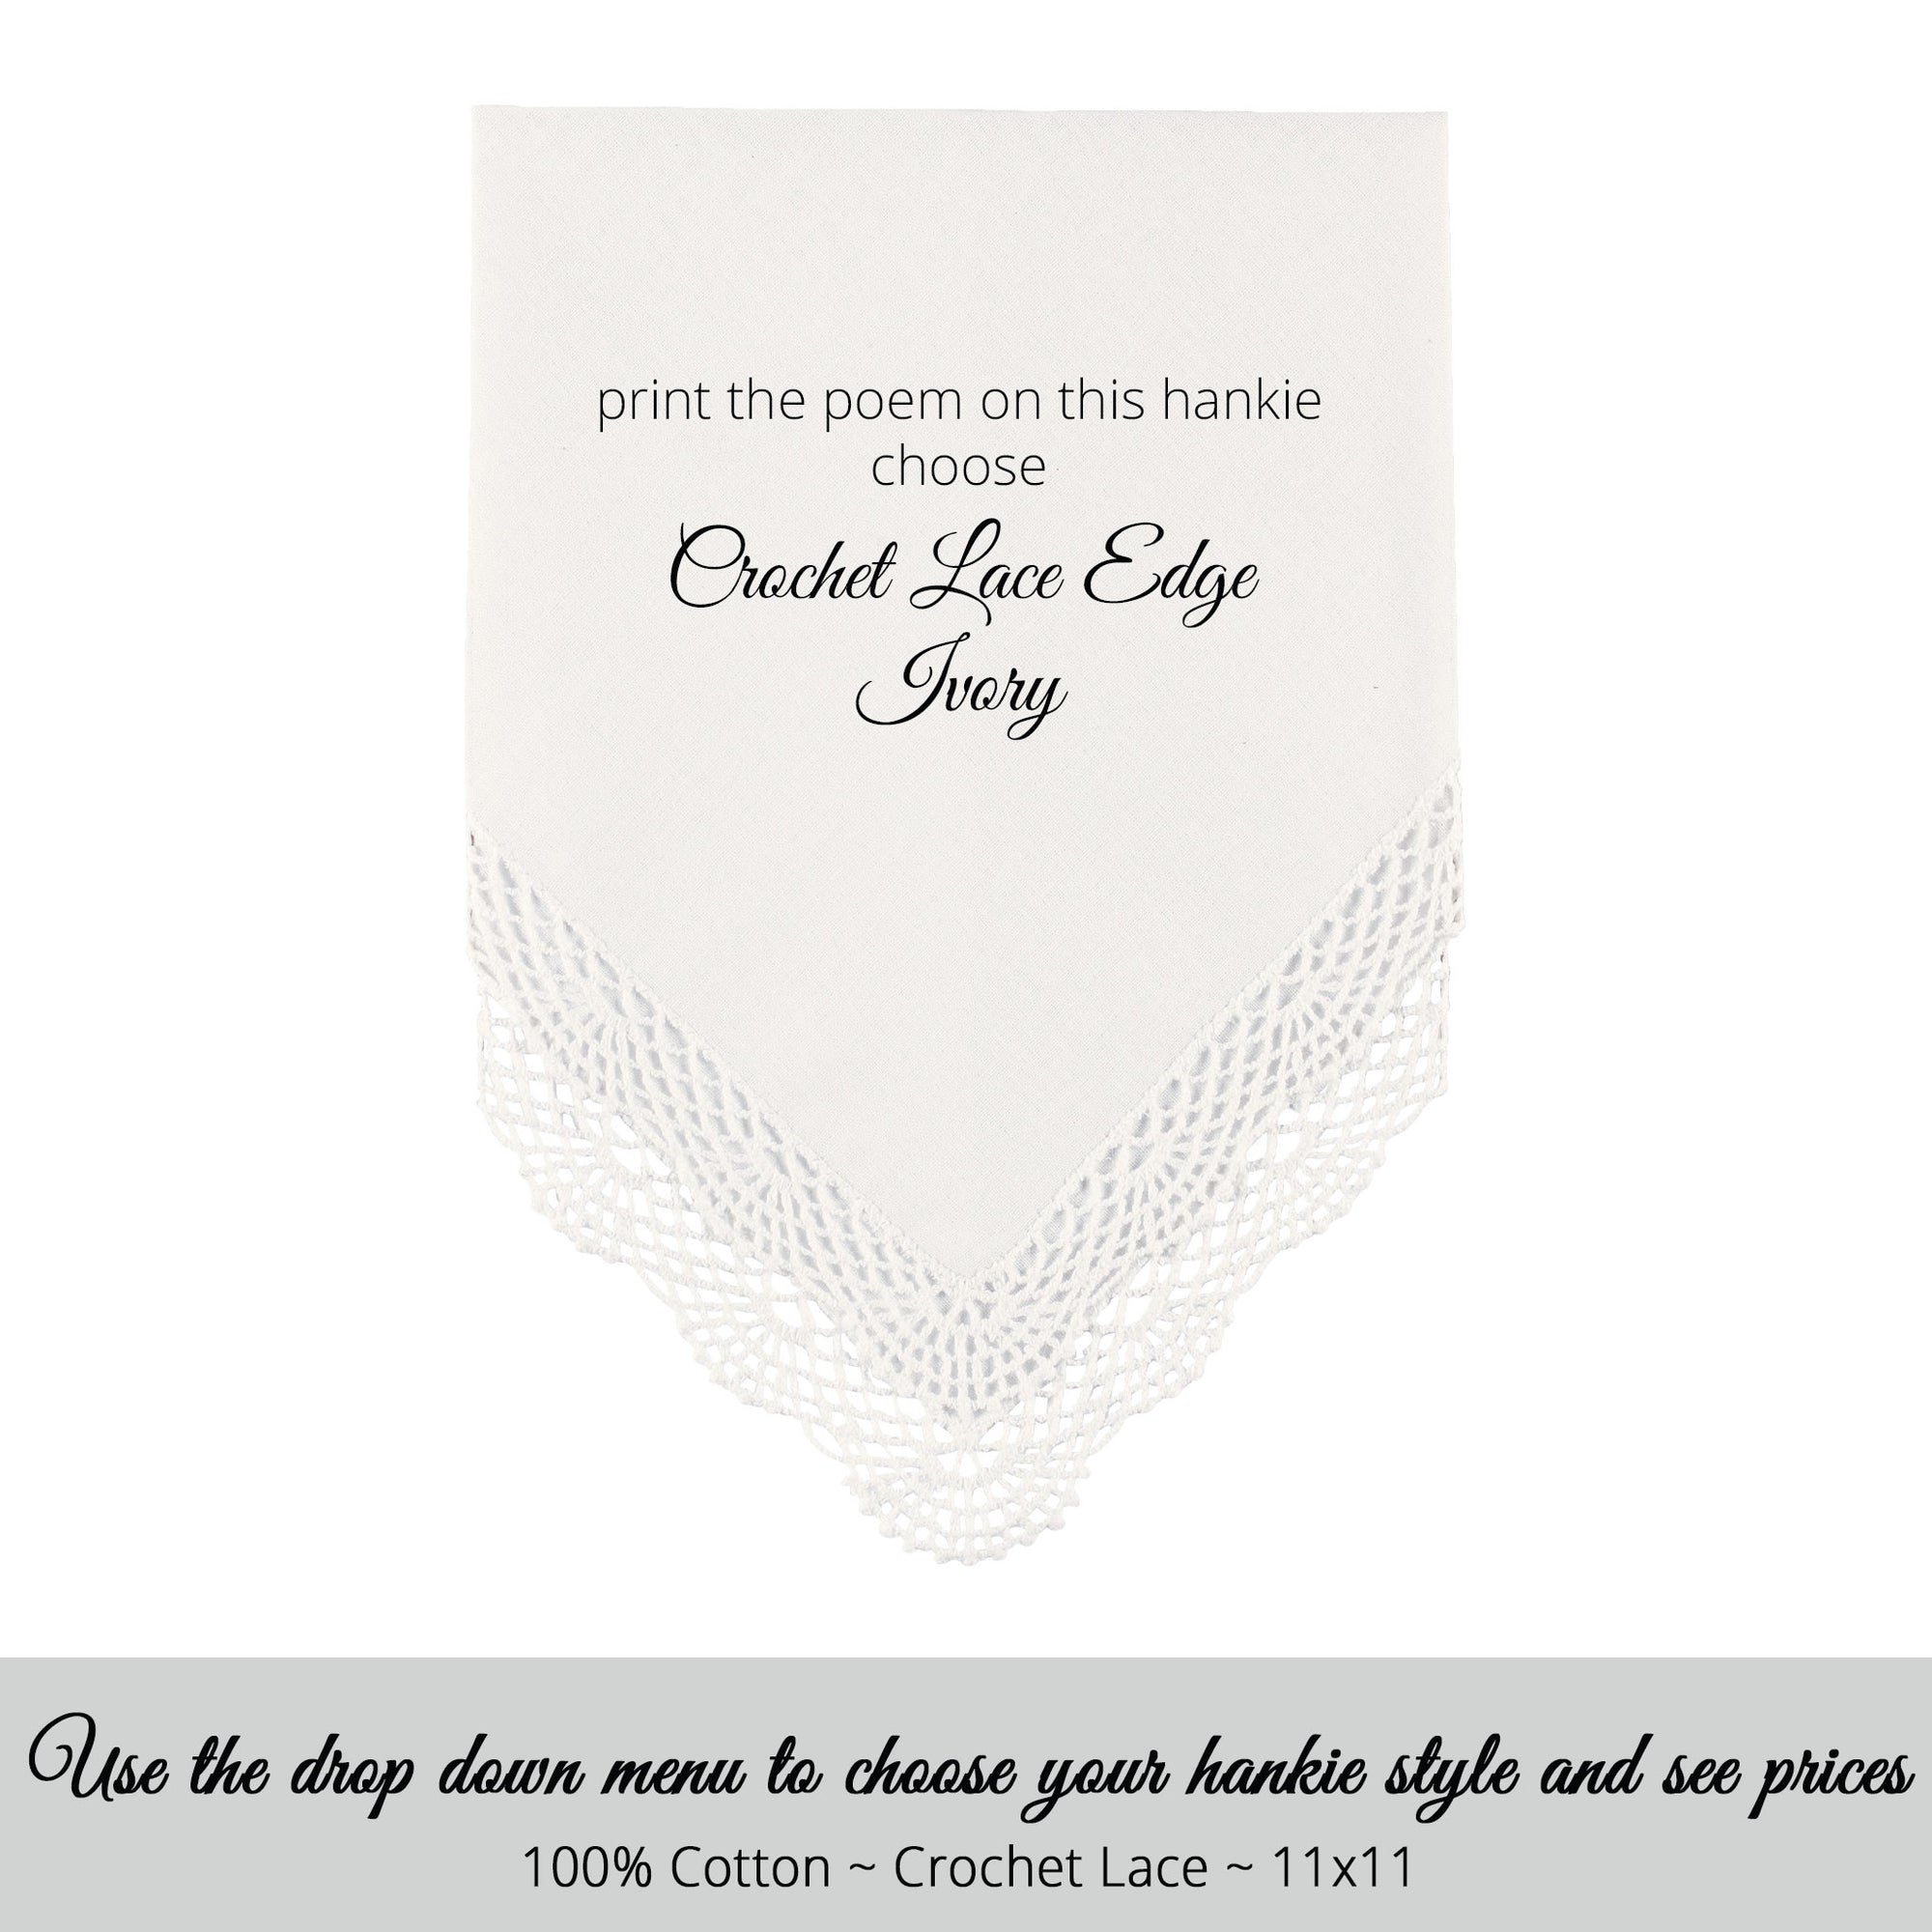 Wedding handkerchief ivory with crochet lace edge for the mother of the groom poem printed hankie